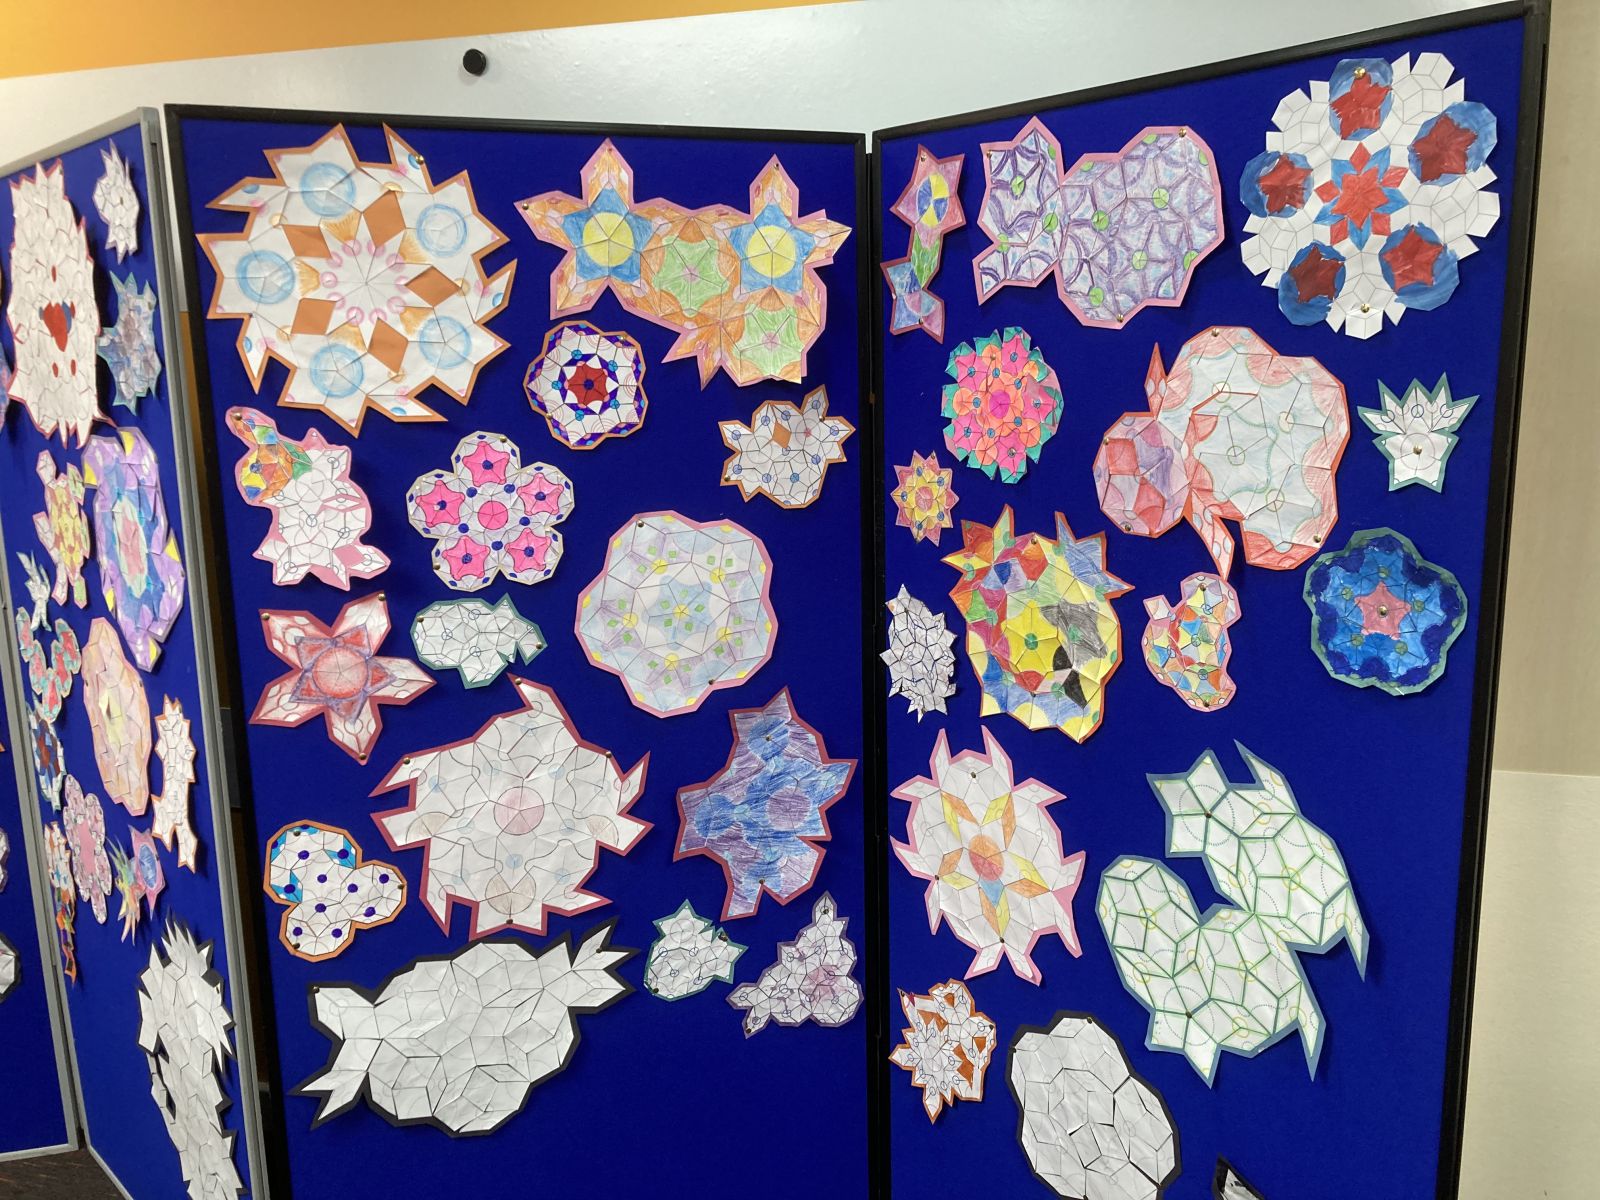 Example of aperiodic tilings created by Kents Hill Park School